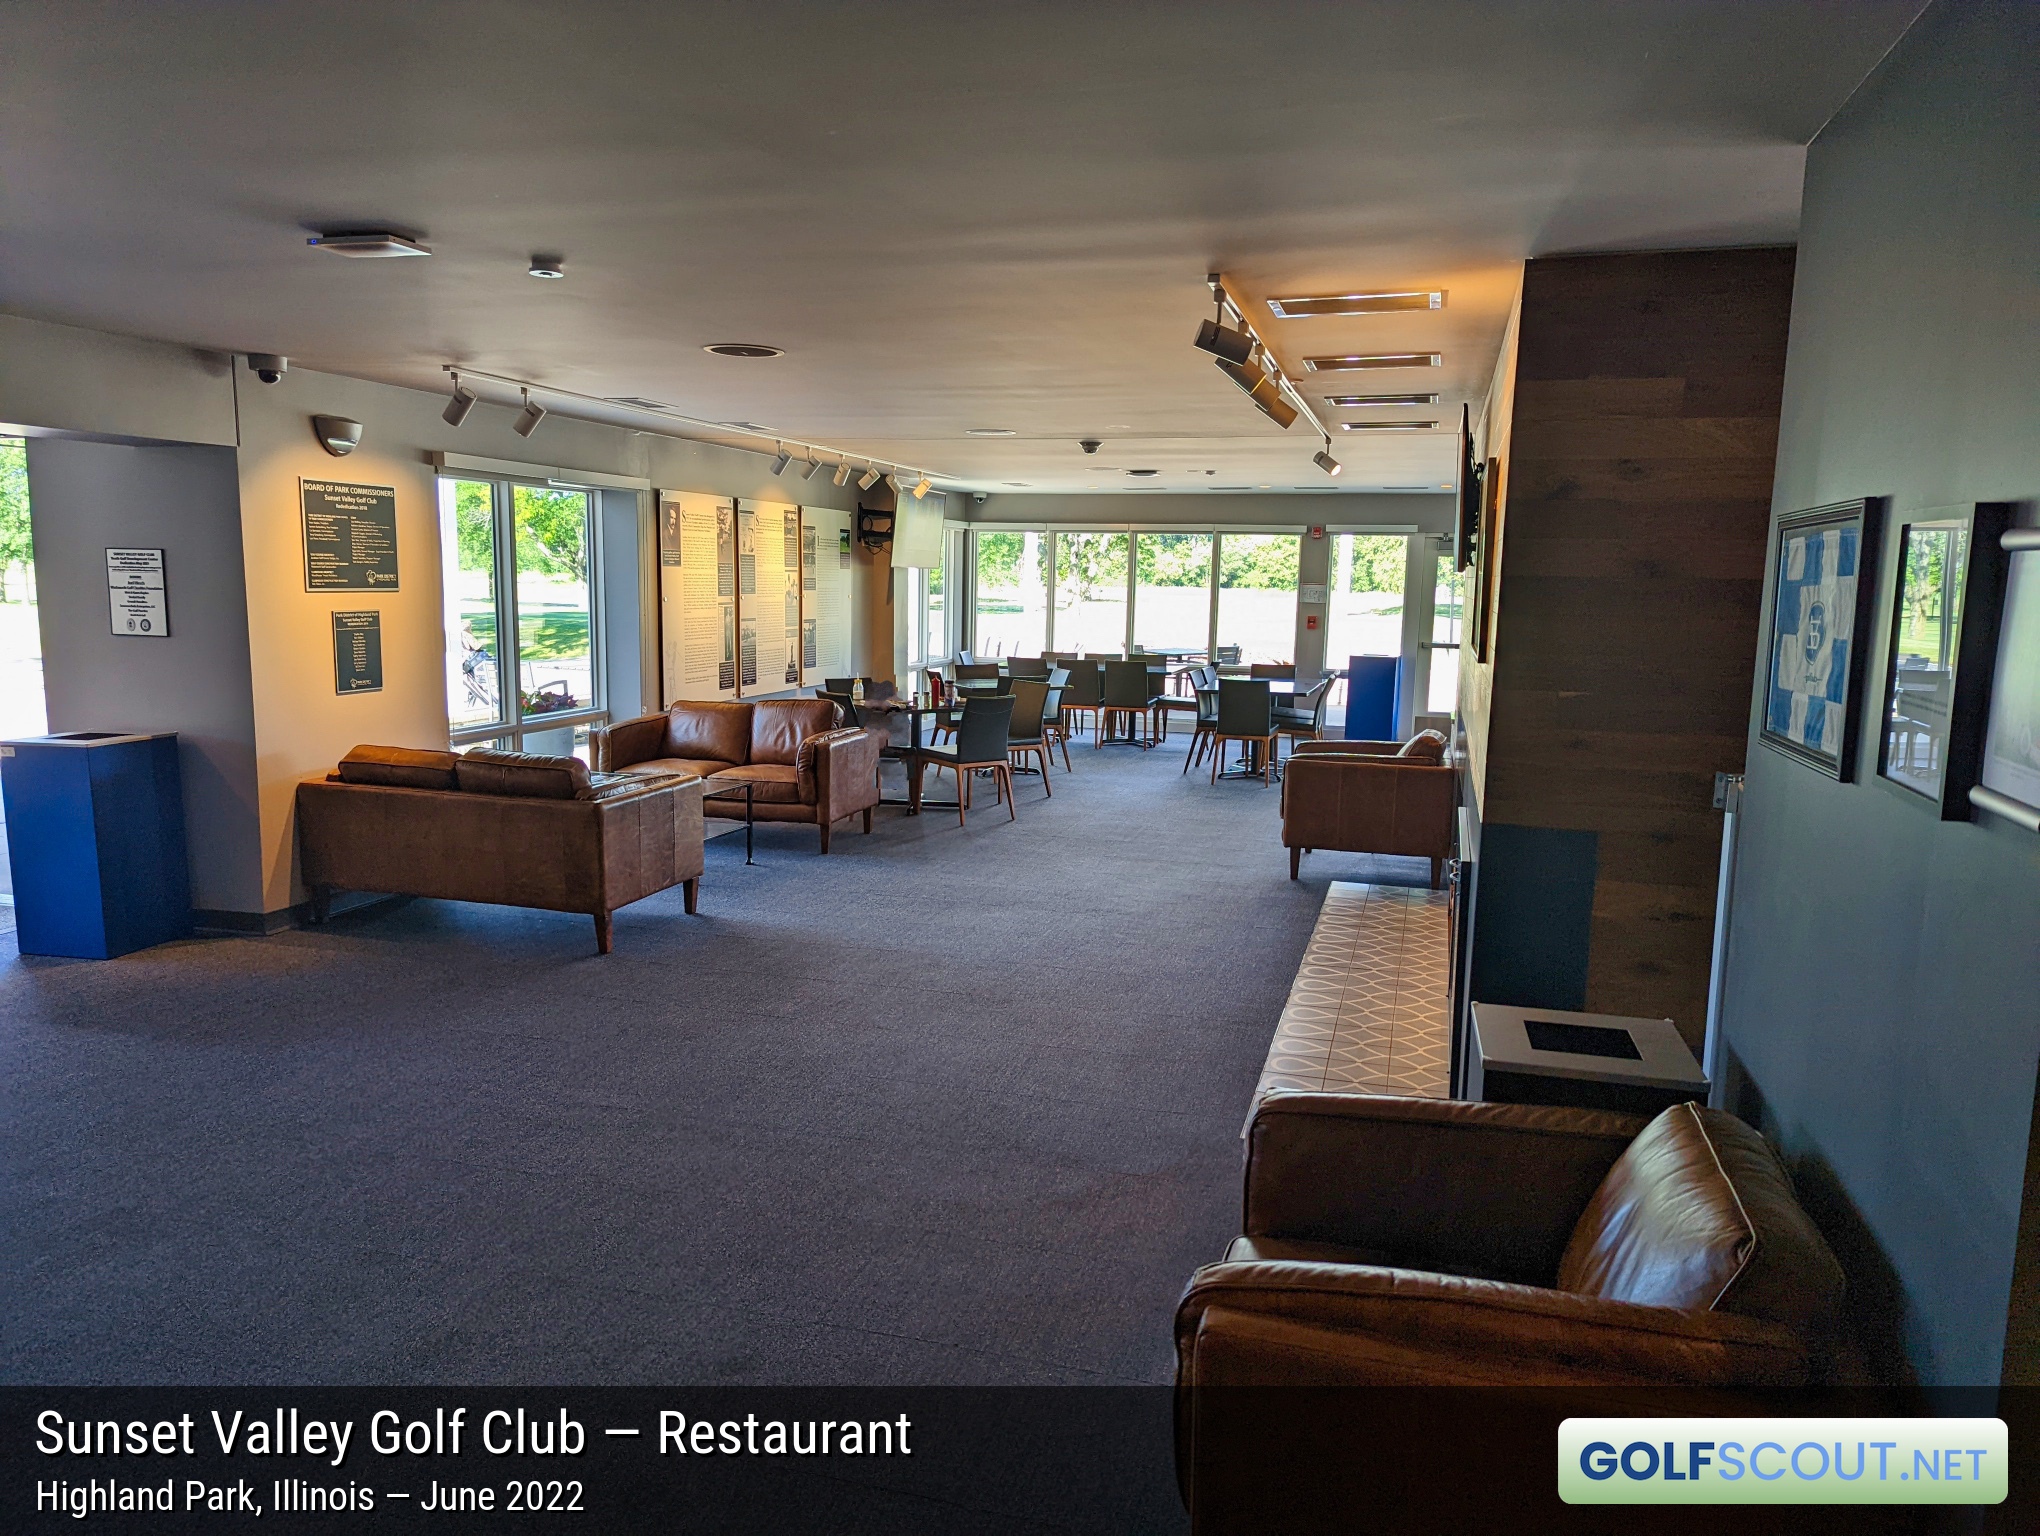 Photo of the restaurant at Sunset Valley Golf Club in Highland Park, Illinois. 